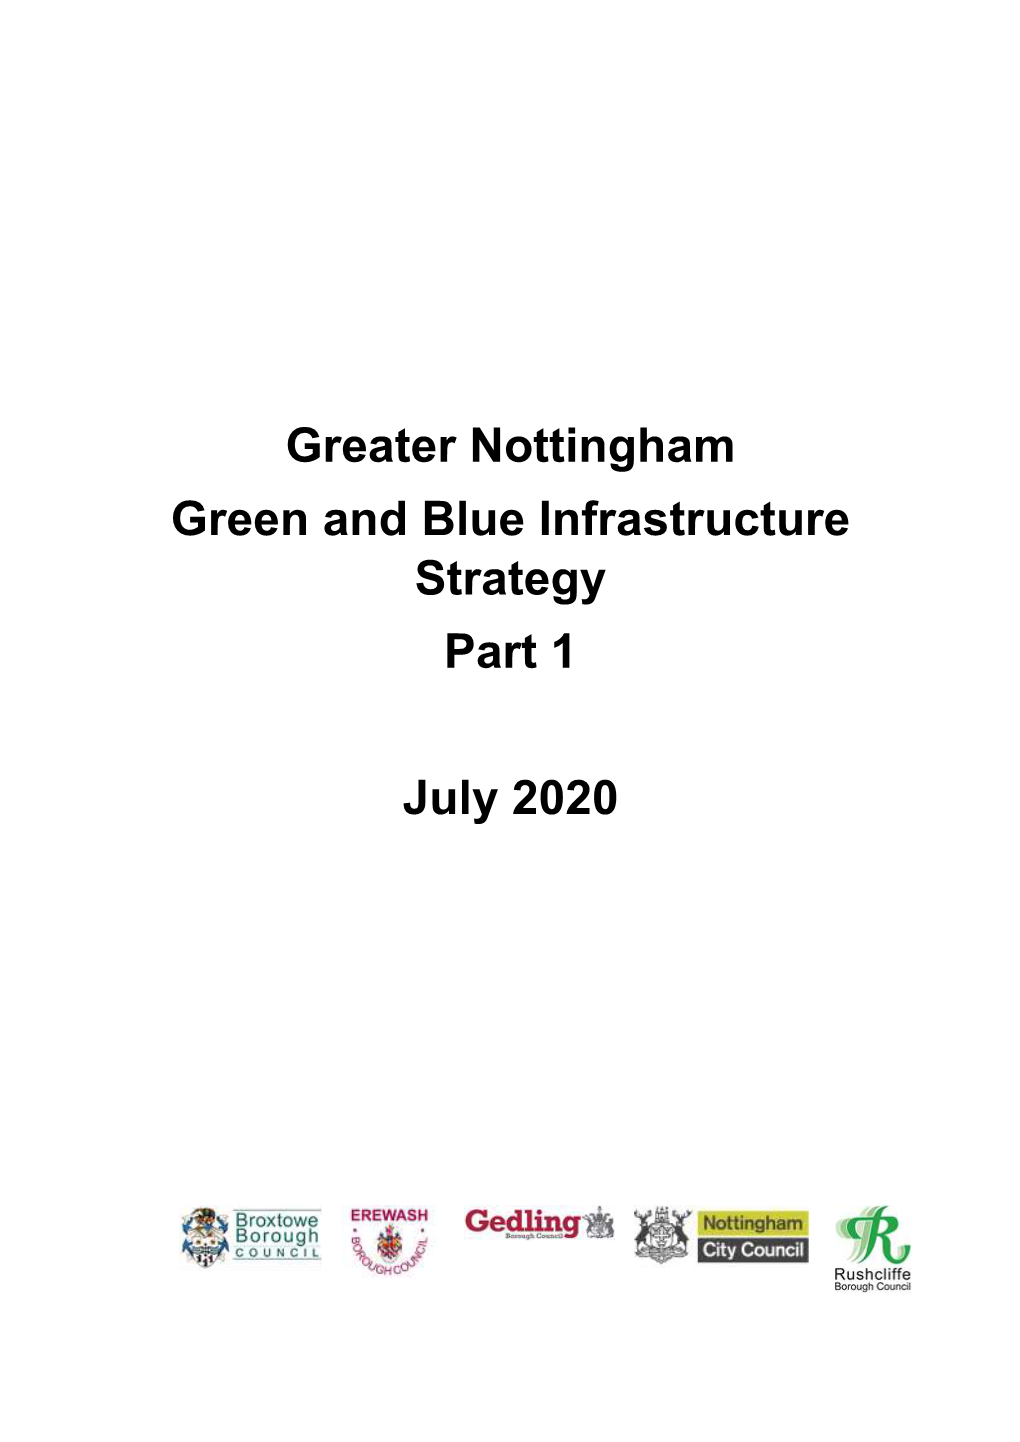 Greater Nottingham Green and Blue Infrastructure Strategy Part 1 July